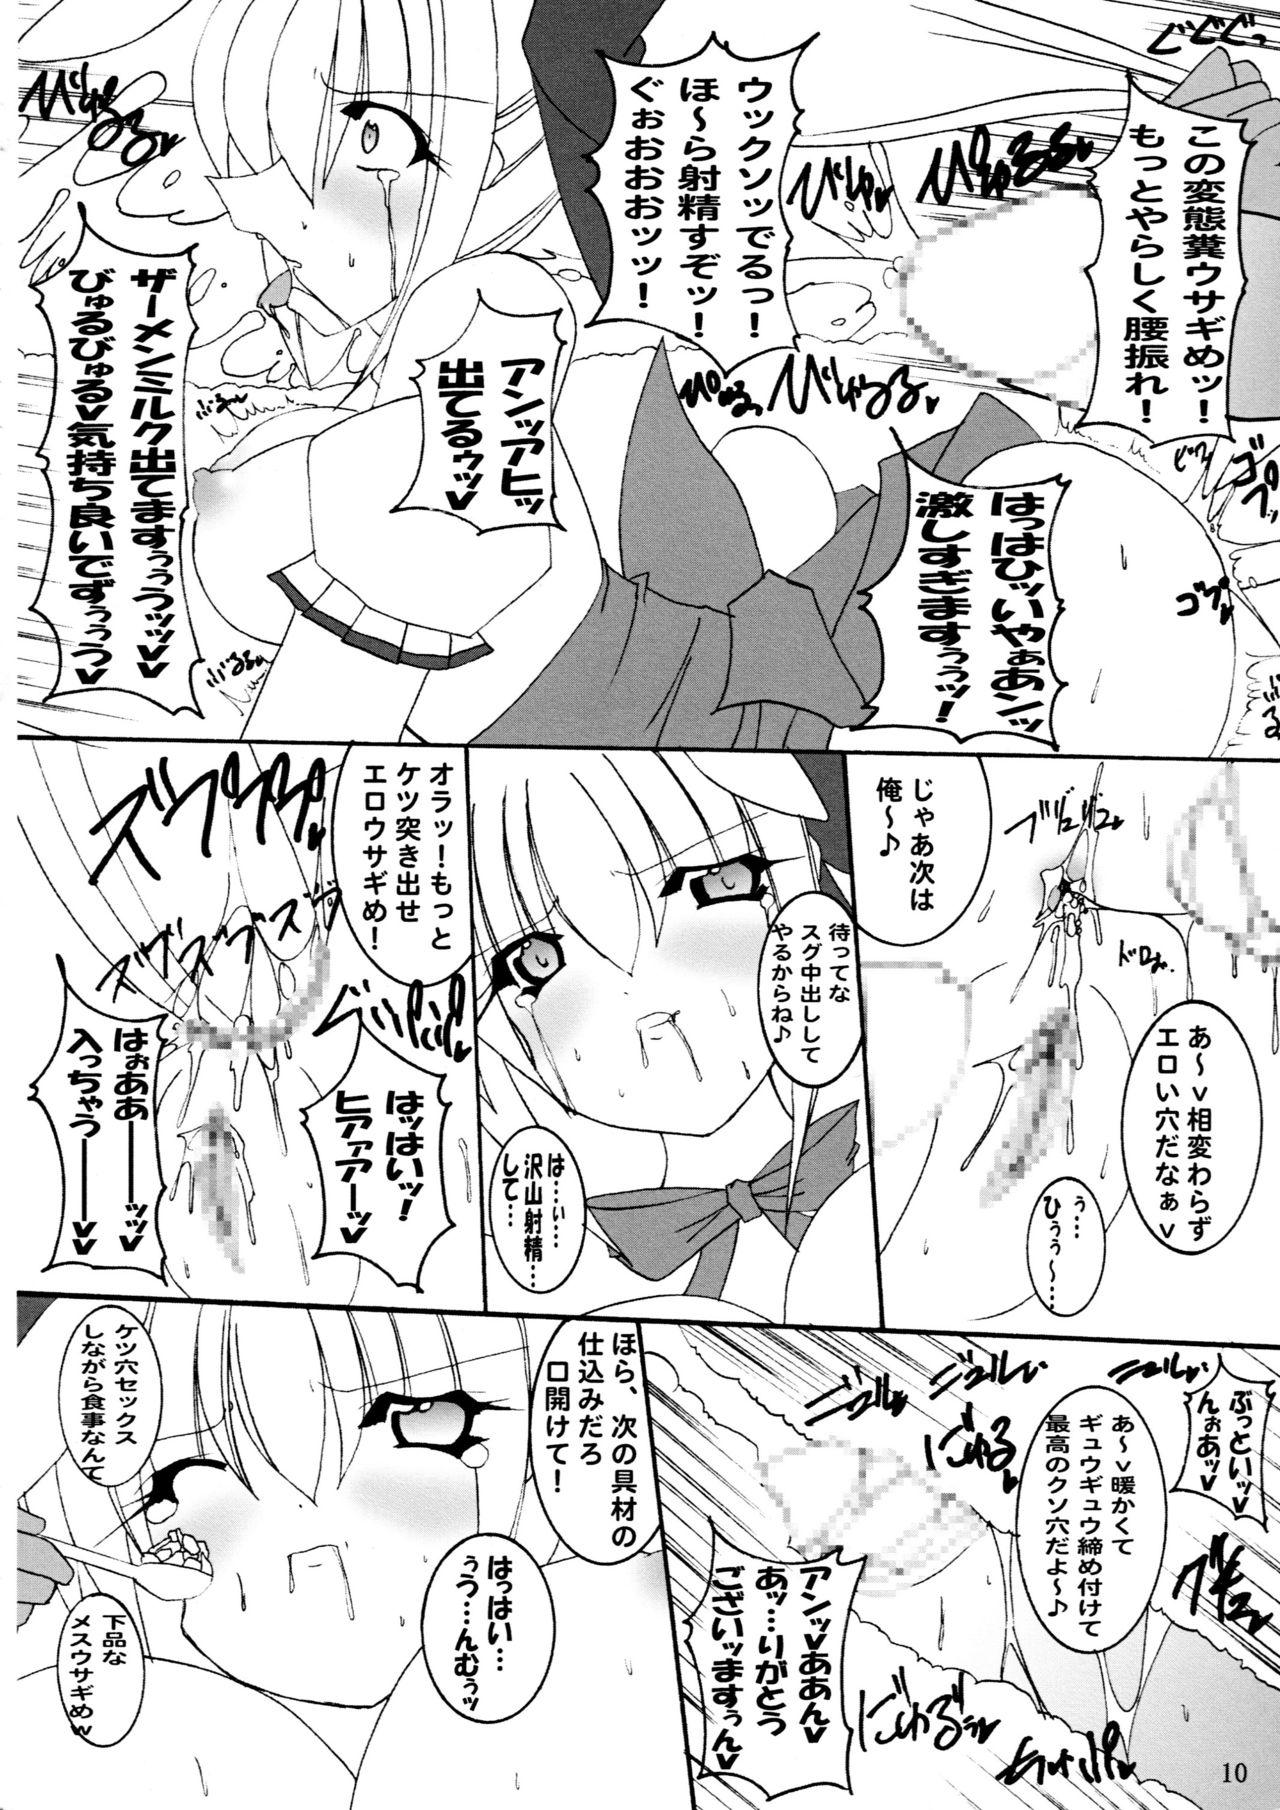 Anal Hitori Twintail & Abnormal Carnival - Di gi charat Hot Whores - Page 11